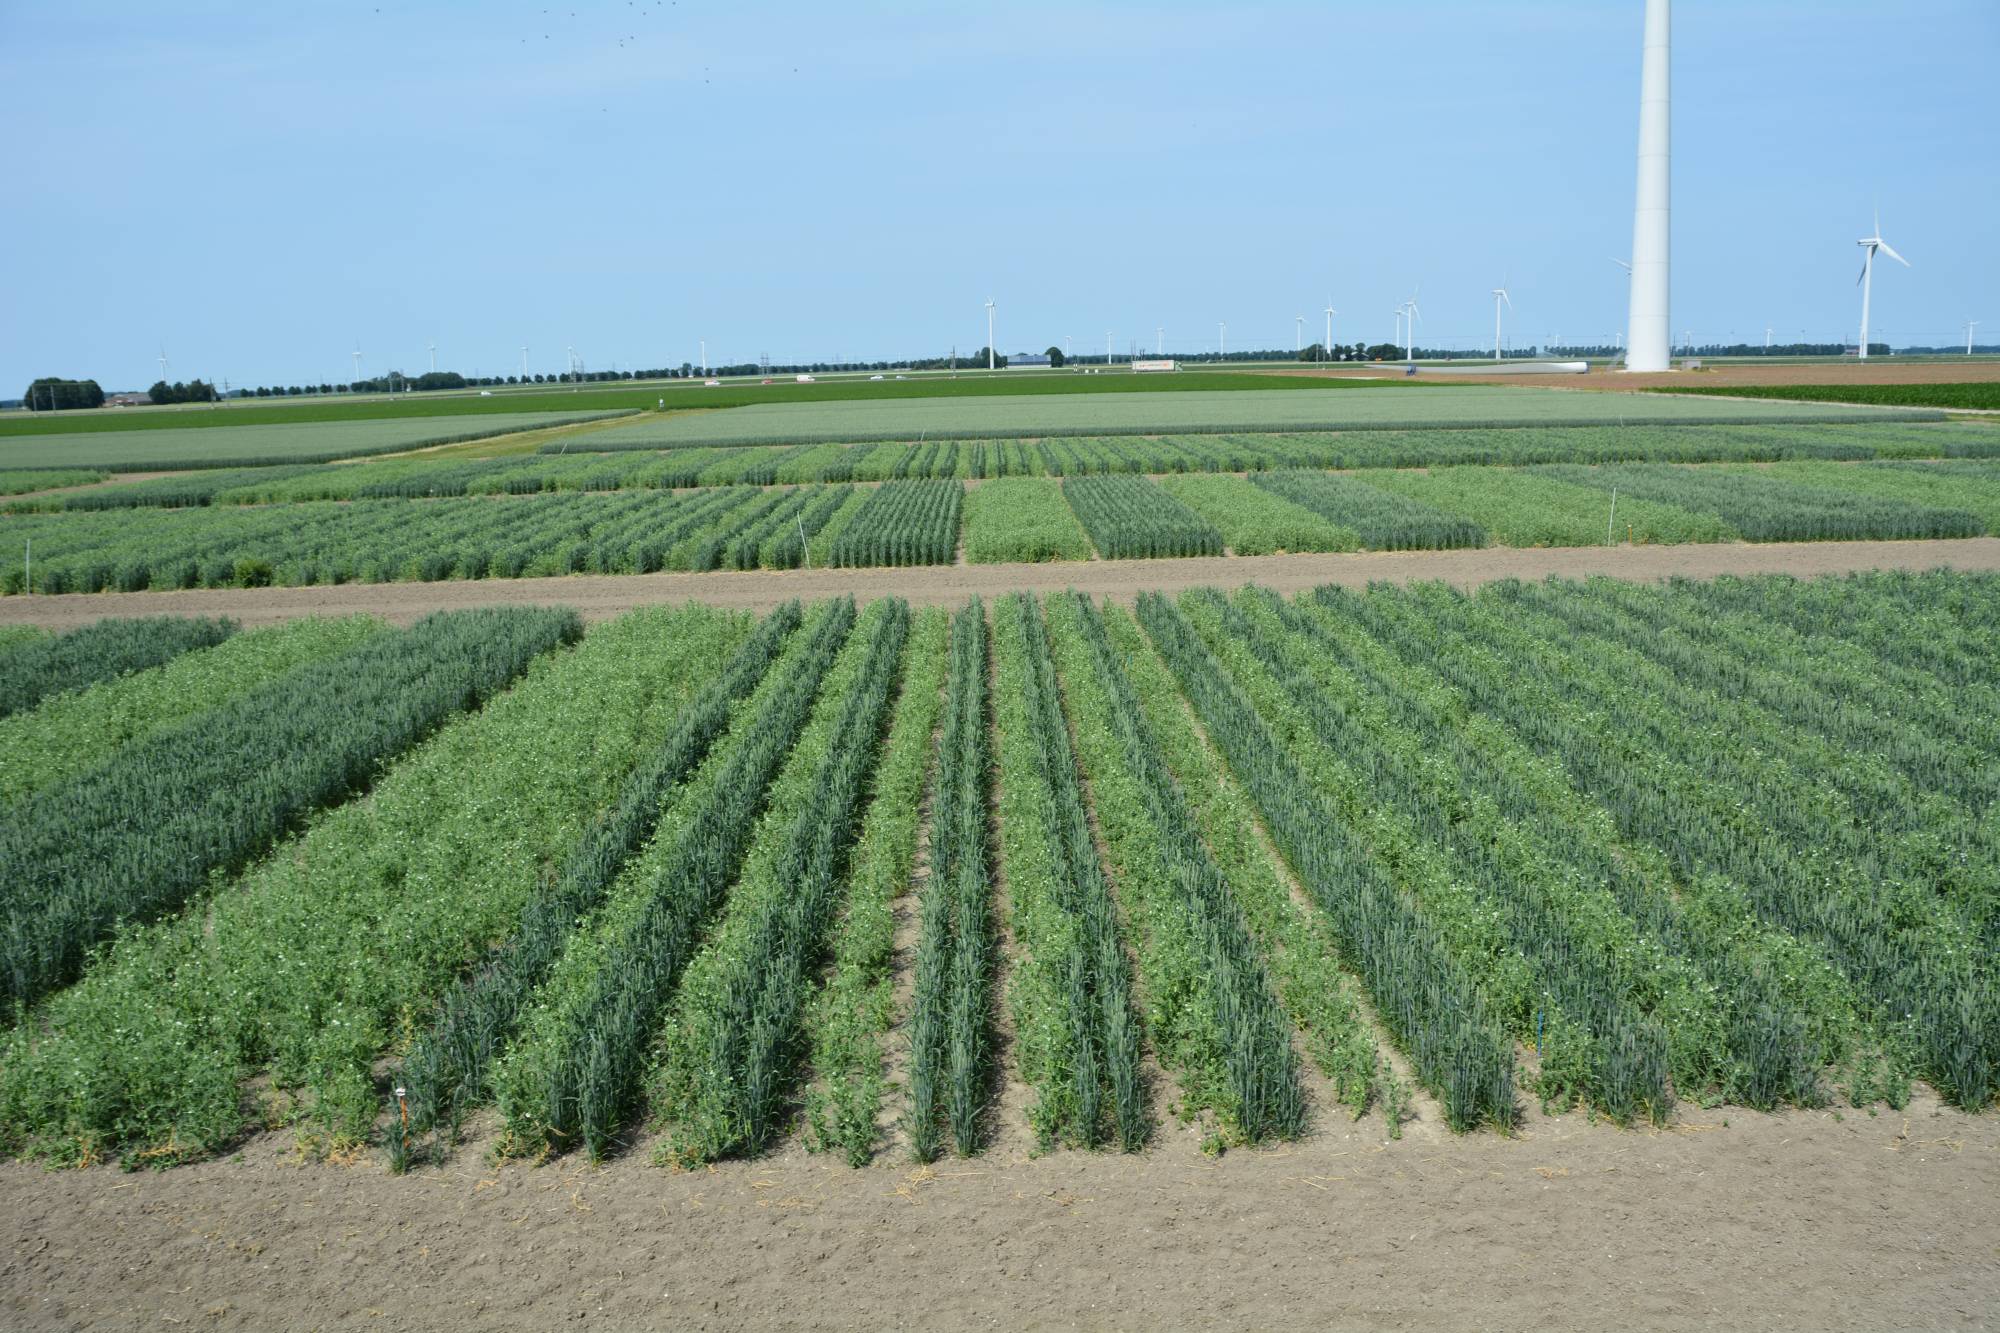 Wheat-pea trial, the Netherlands